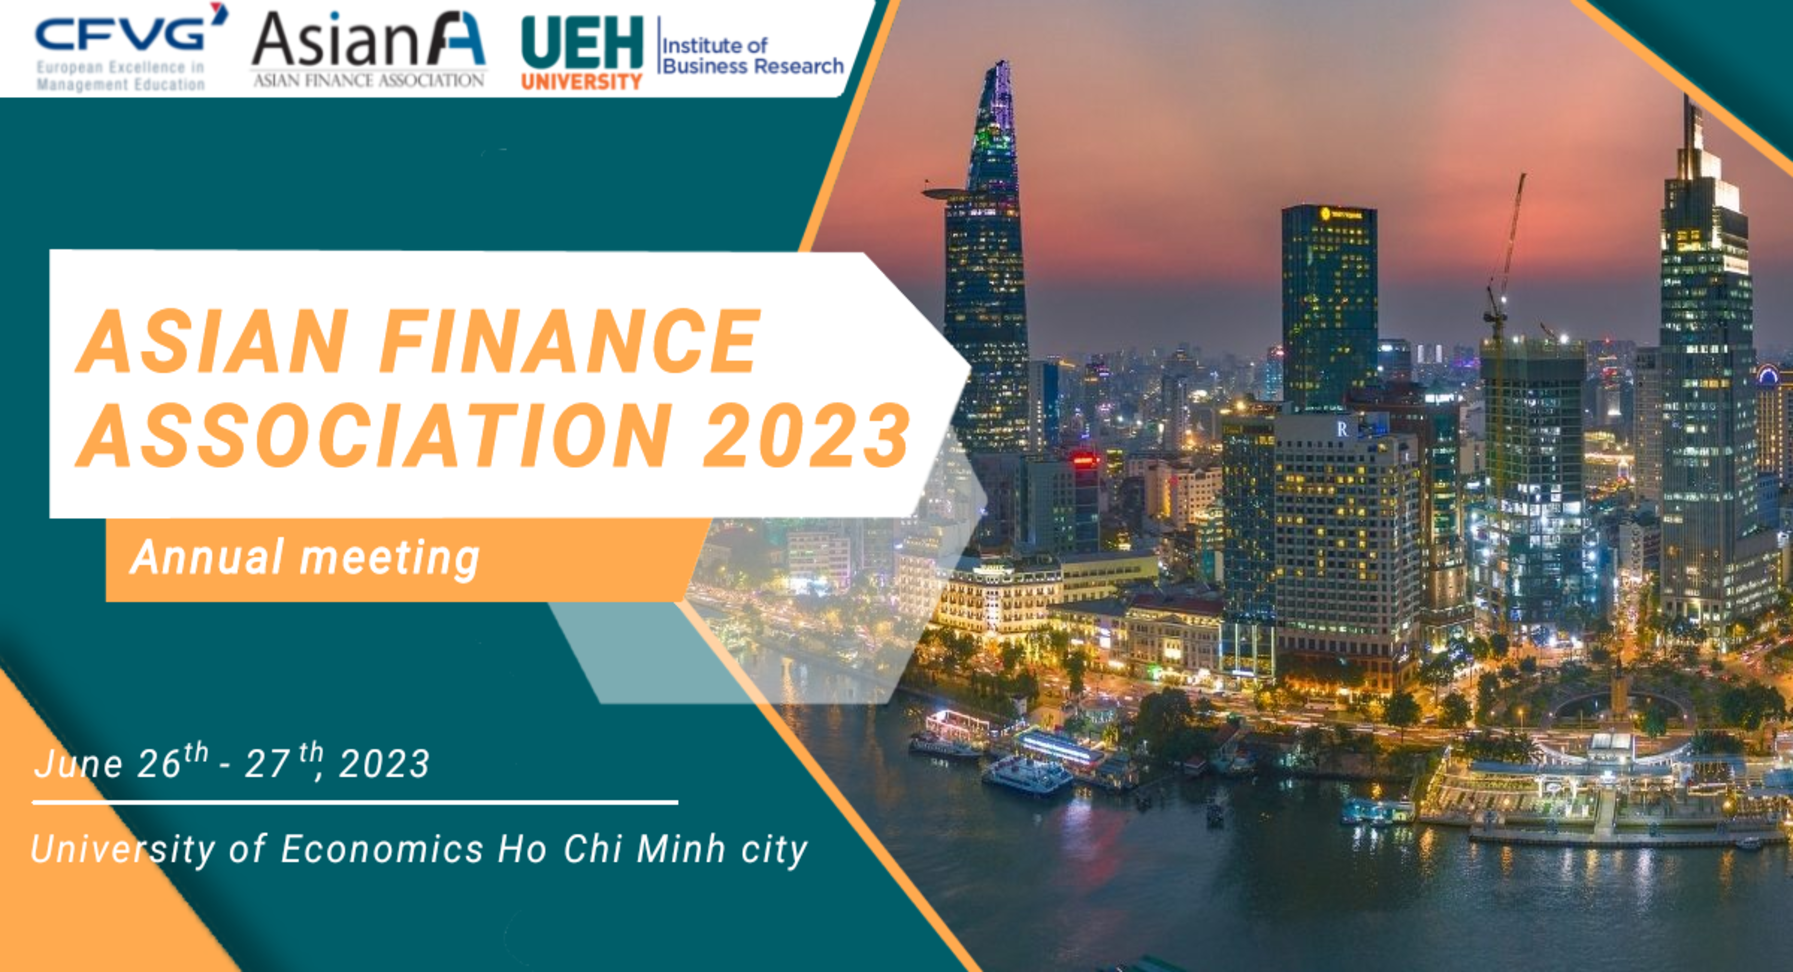 The 35th Asian Finance Association Annual Conference